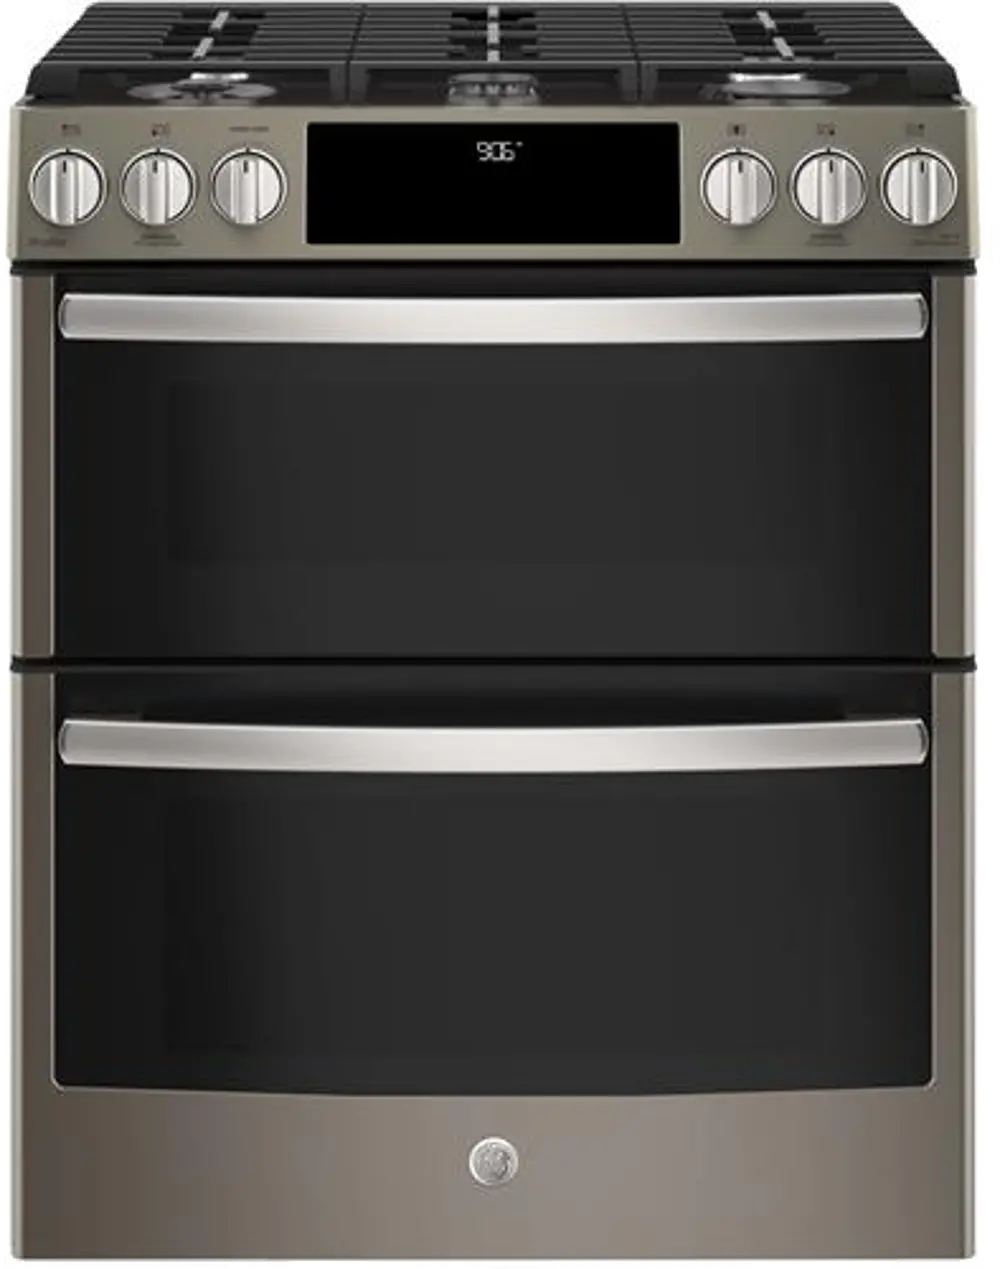 PGS960EELES GE Profile Double Oven Gas Range - Black Stainless Steel-1